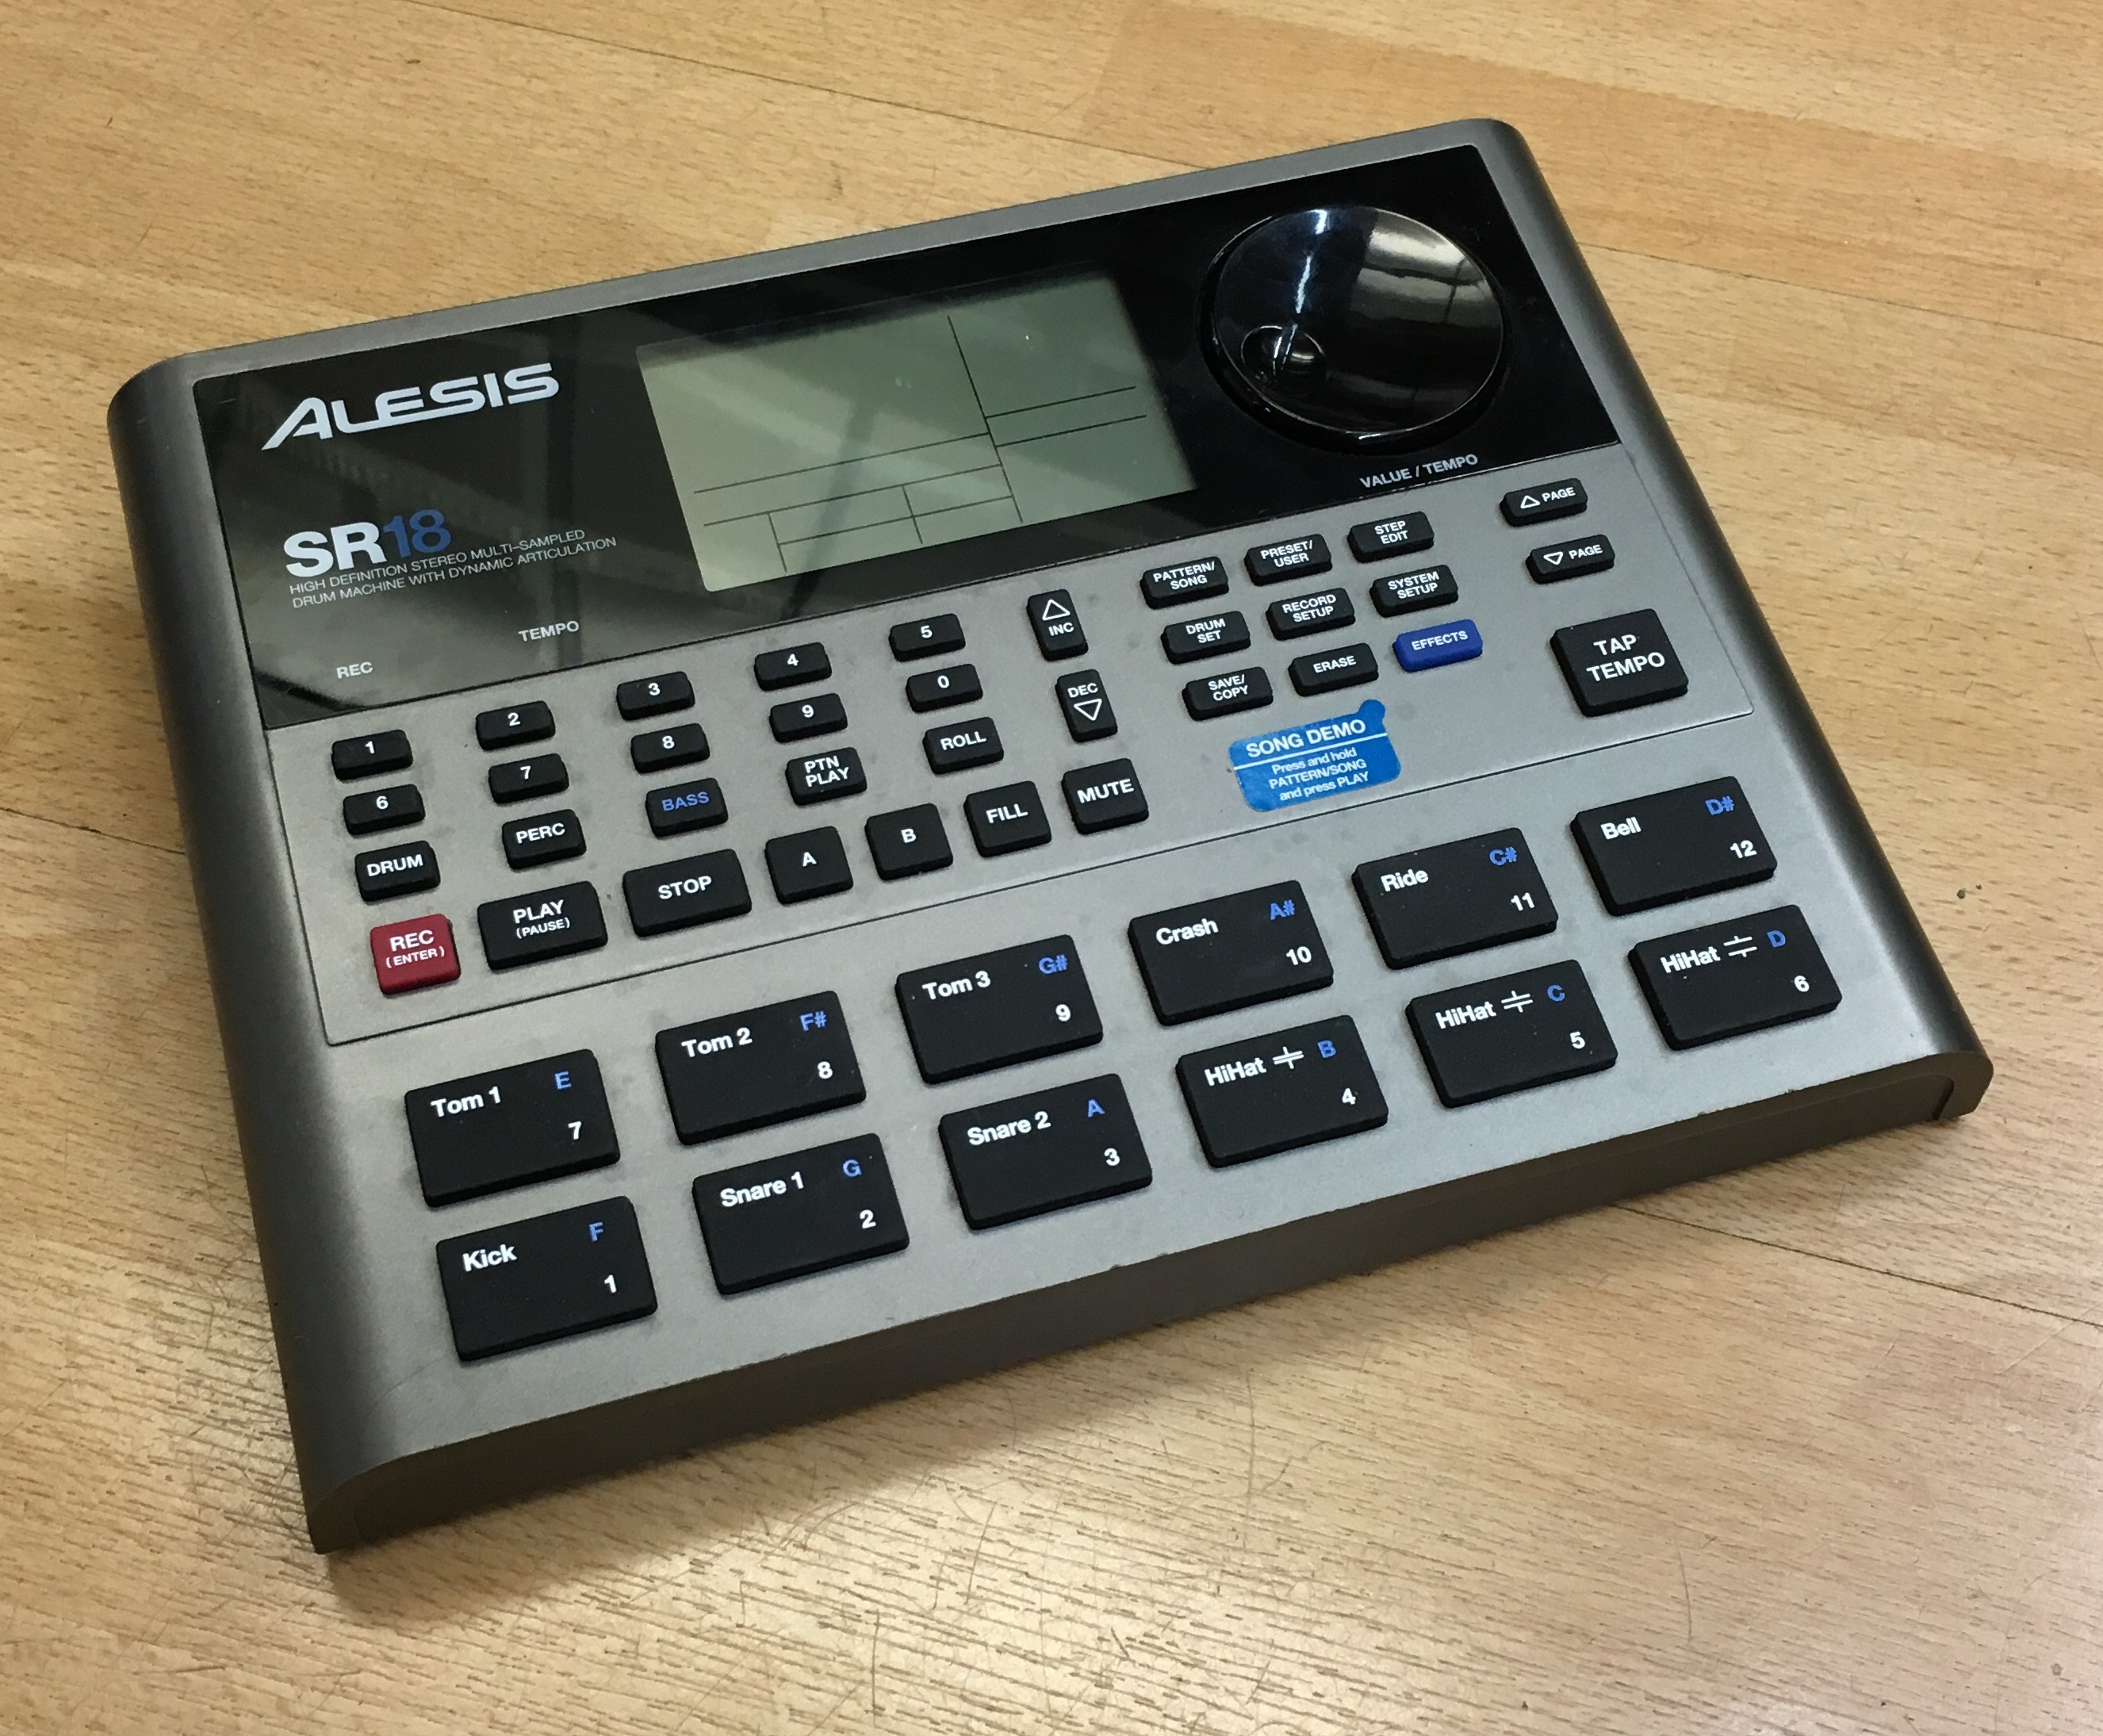 Alesis SR-18 for sale at X Electrical